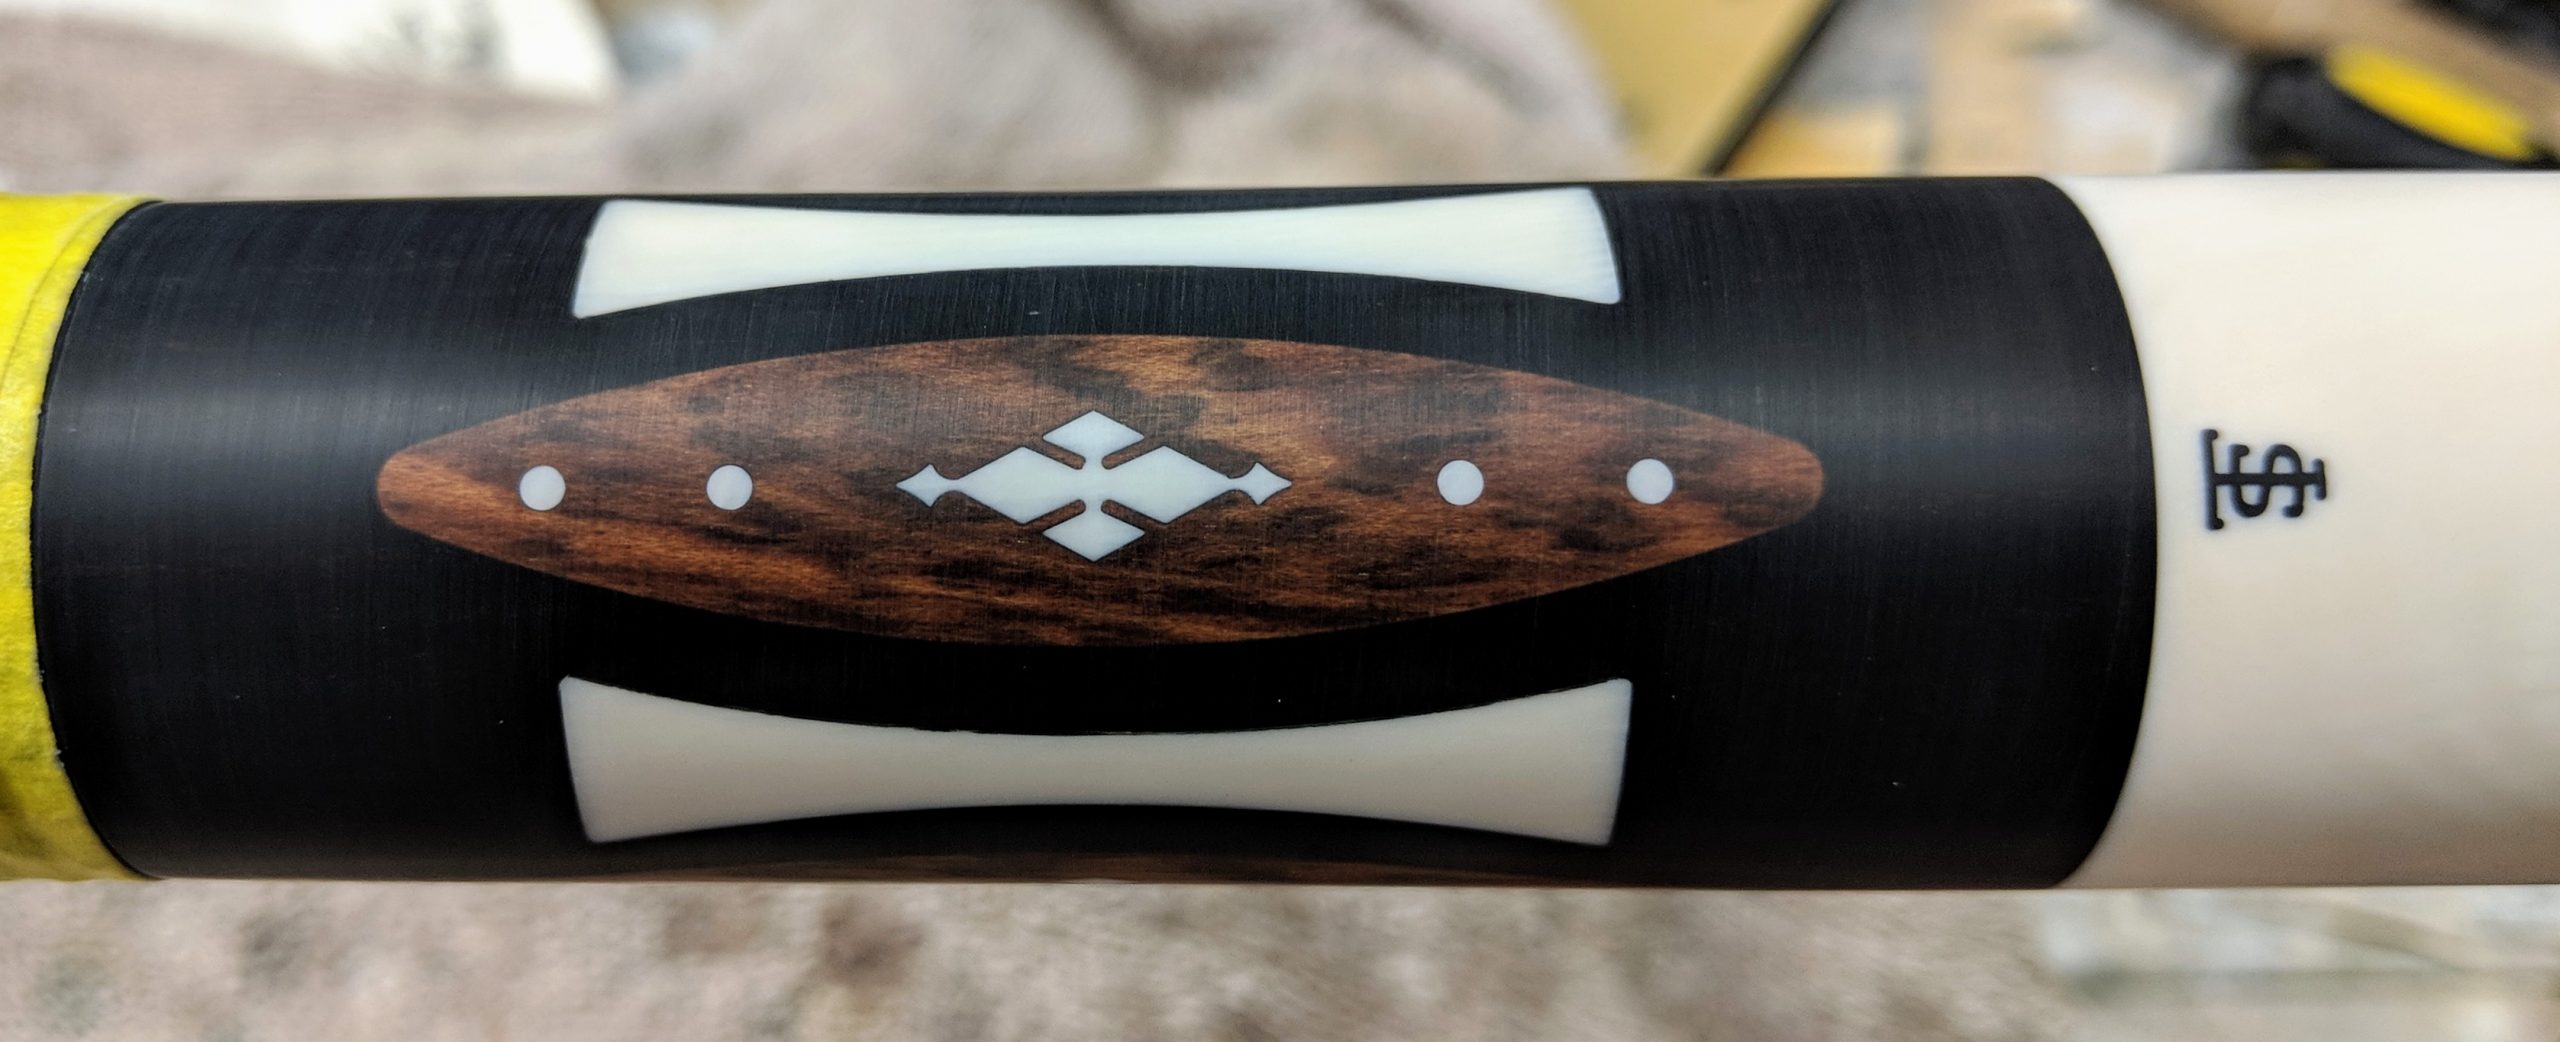 Think I have a new favorite inlay this week.